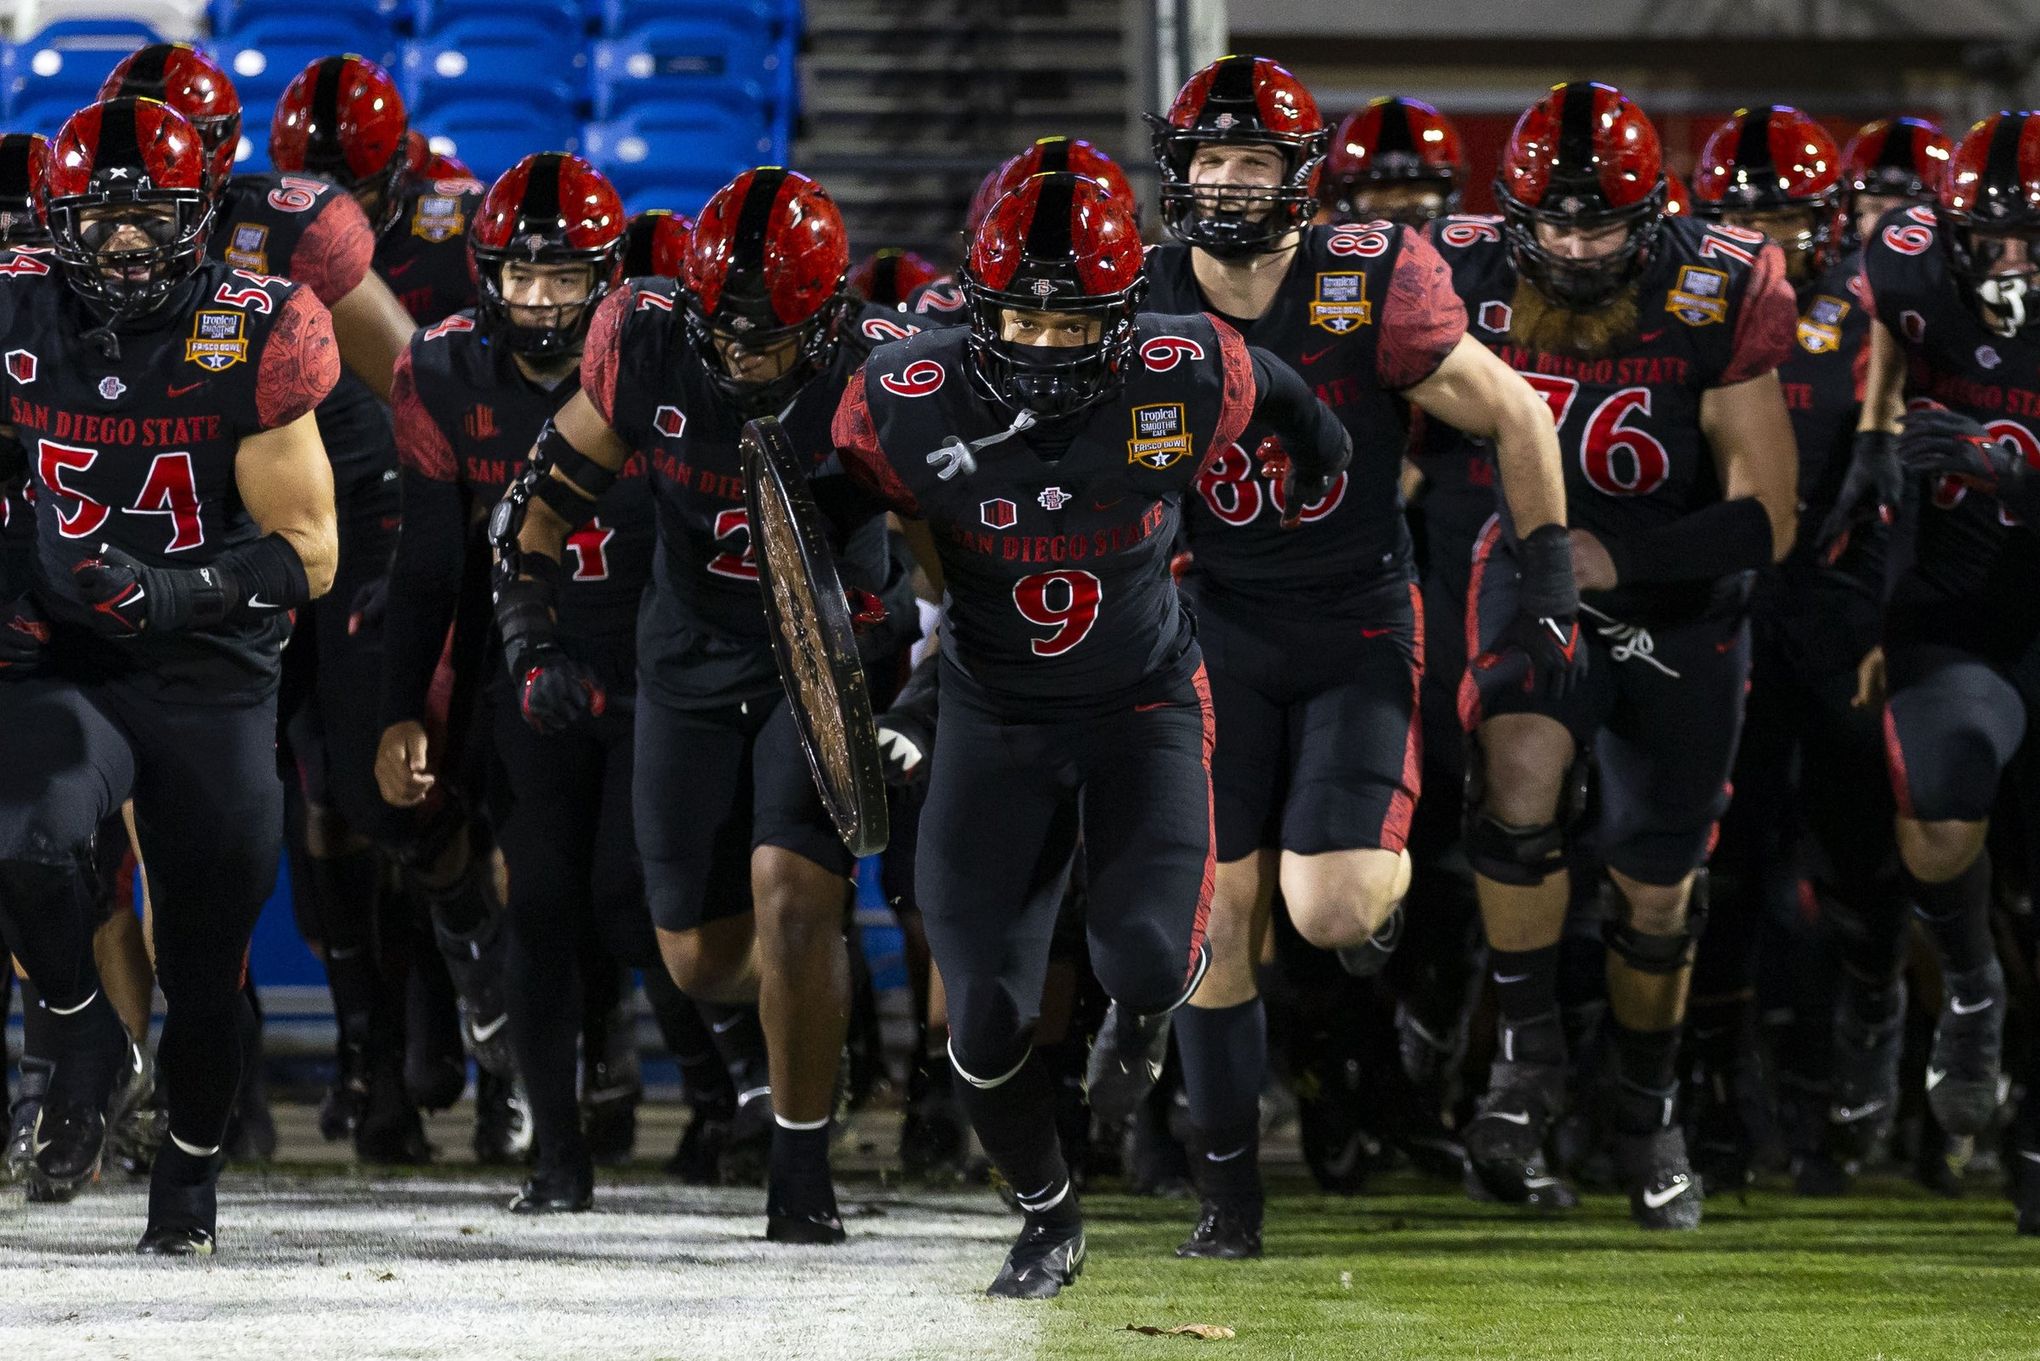 The roots of SDSU's exclusion from the Pac-12